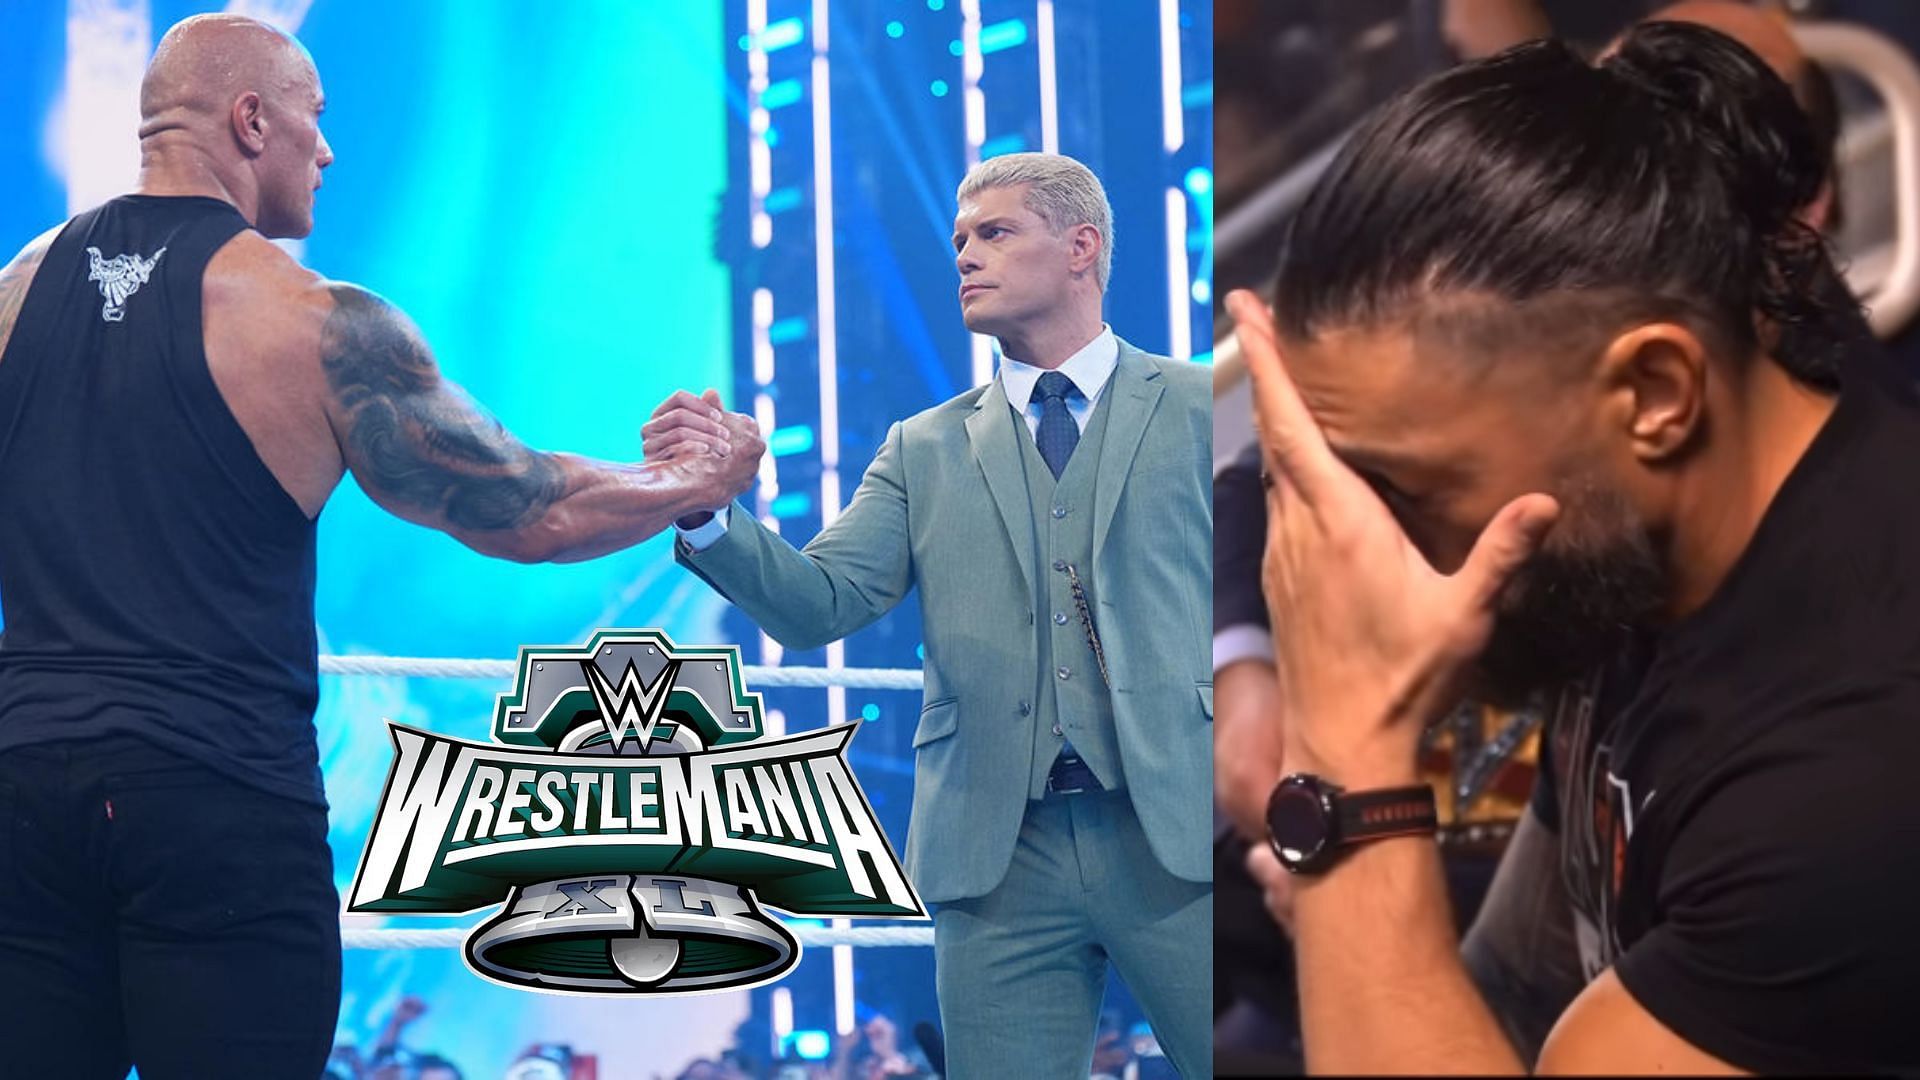 Can you smell what The Rock and Cody Rhodes are cooking?